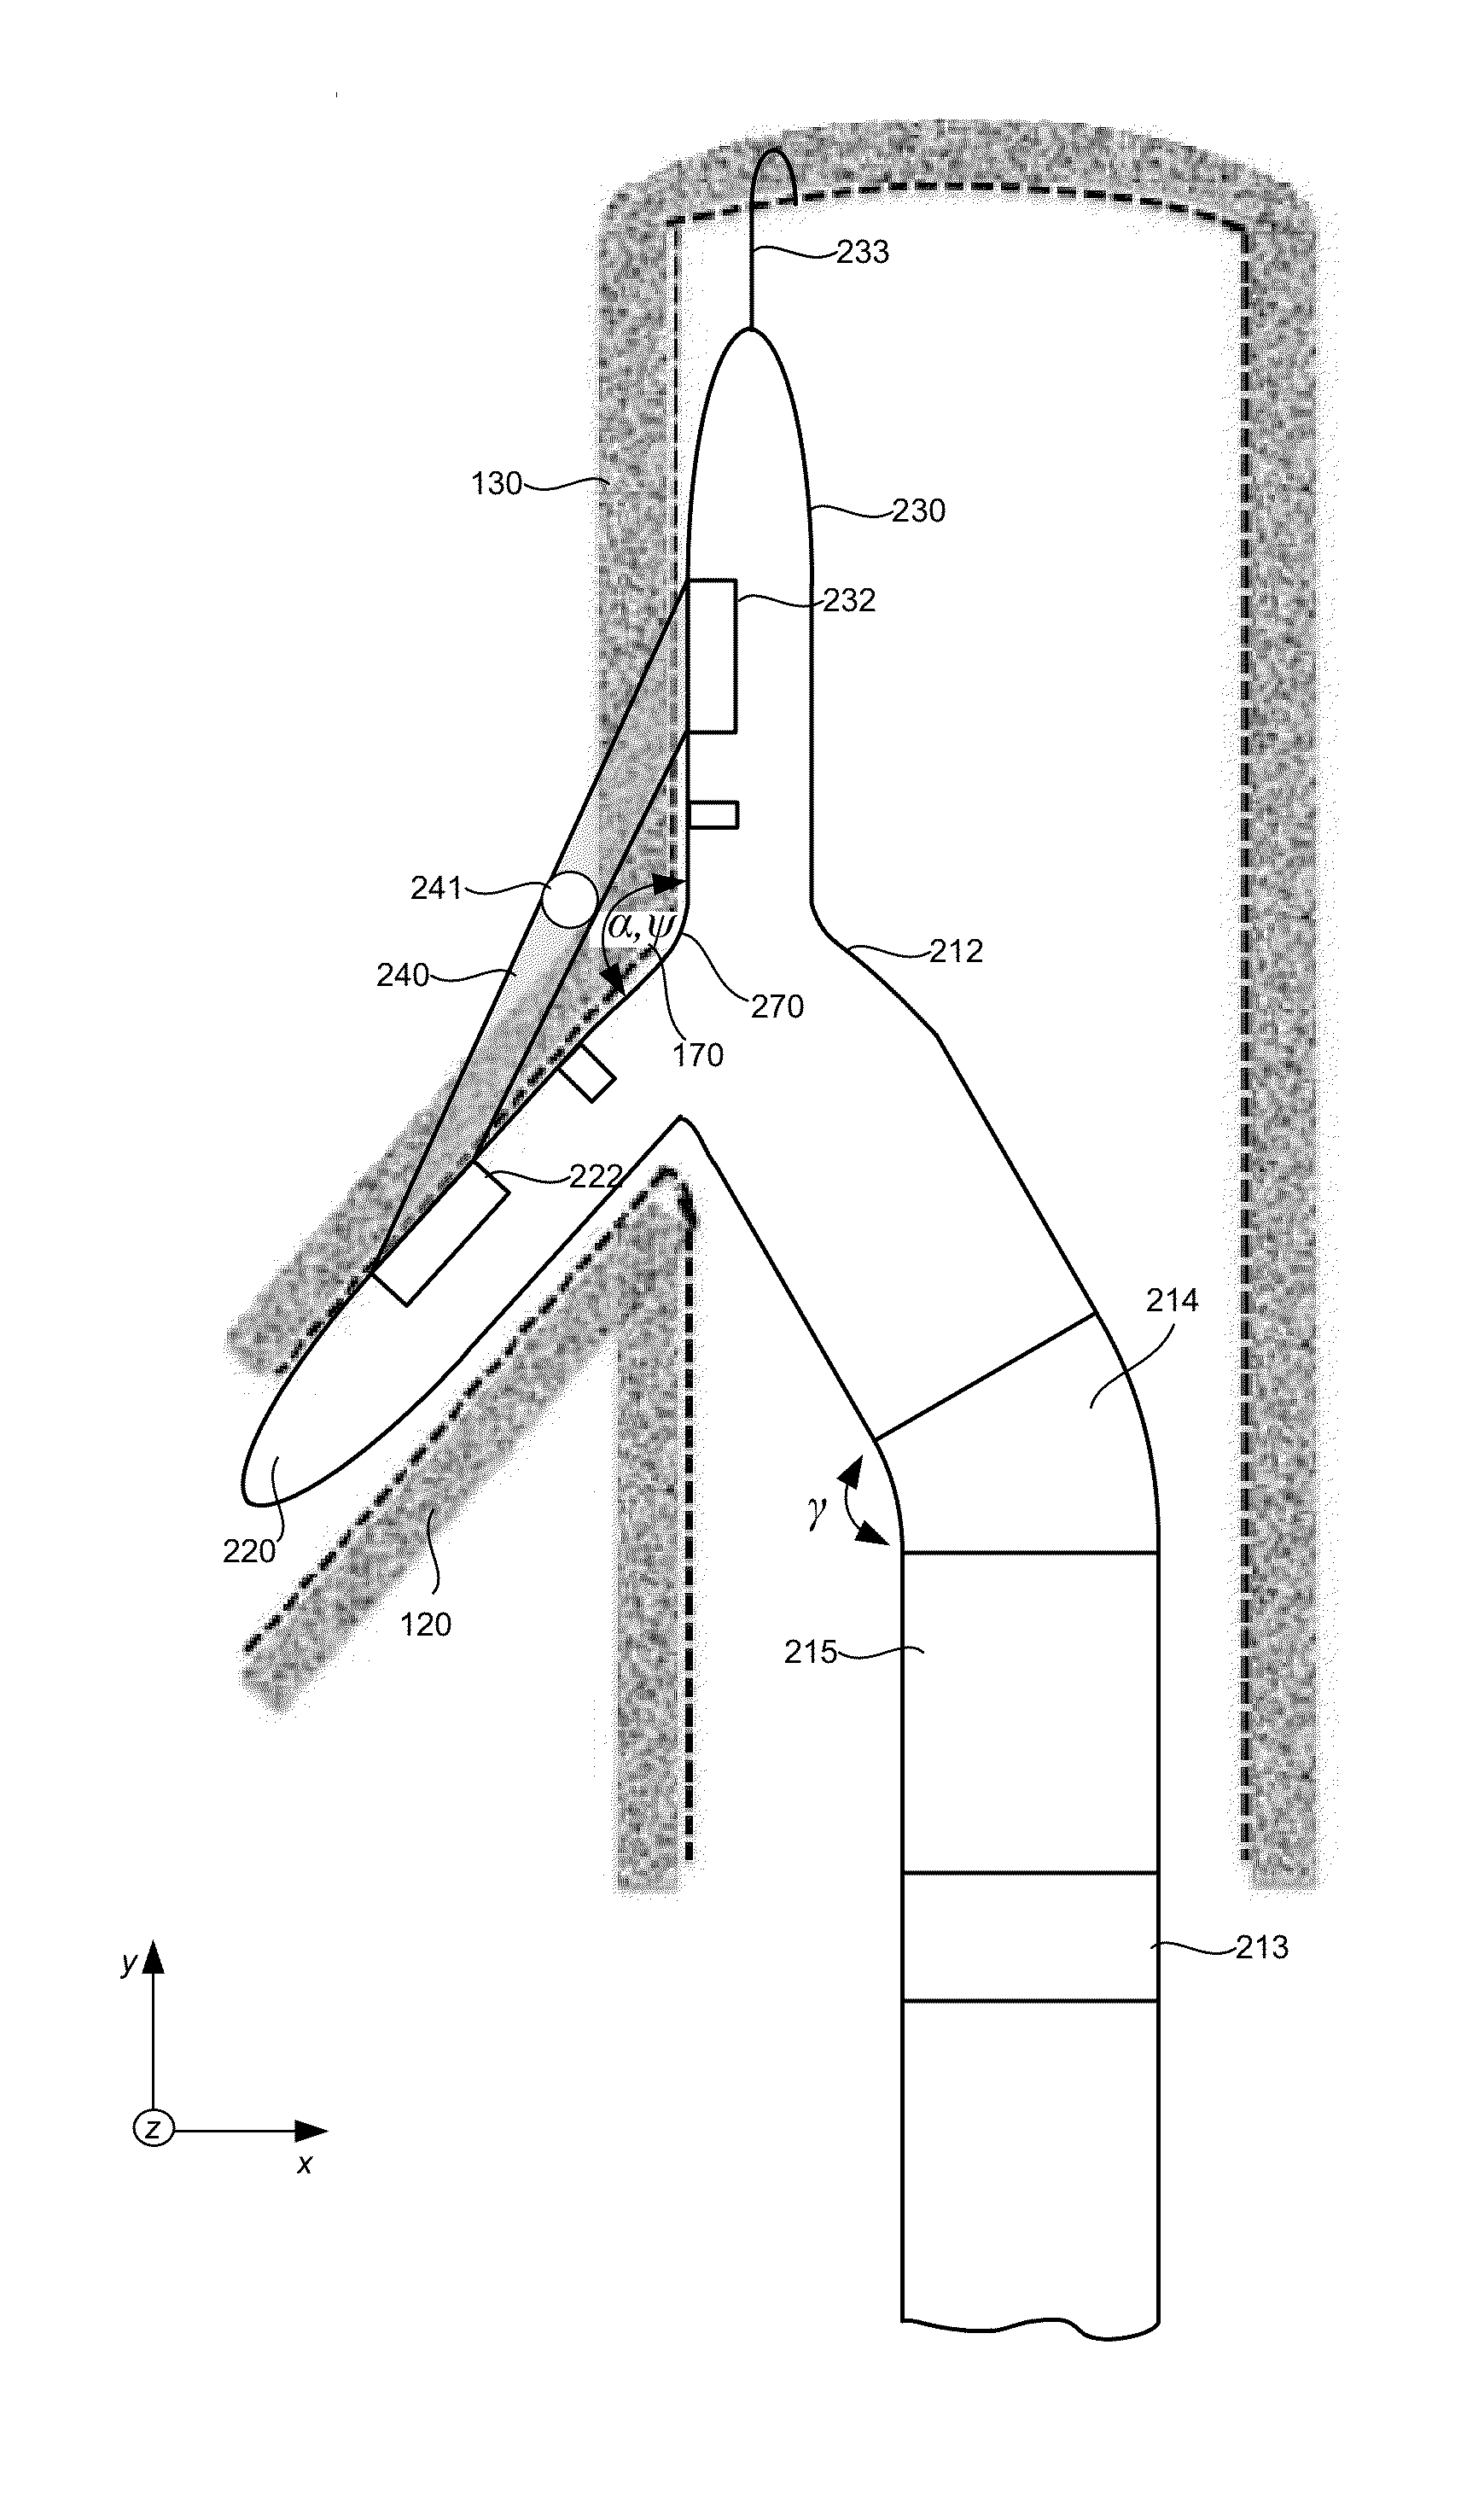 Systems for transcatheter ablation of adventitial or perivascular tissue while preserving medial and intimal vascular integrity through convergence of energy from one or more sources, and methods of making and using same